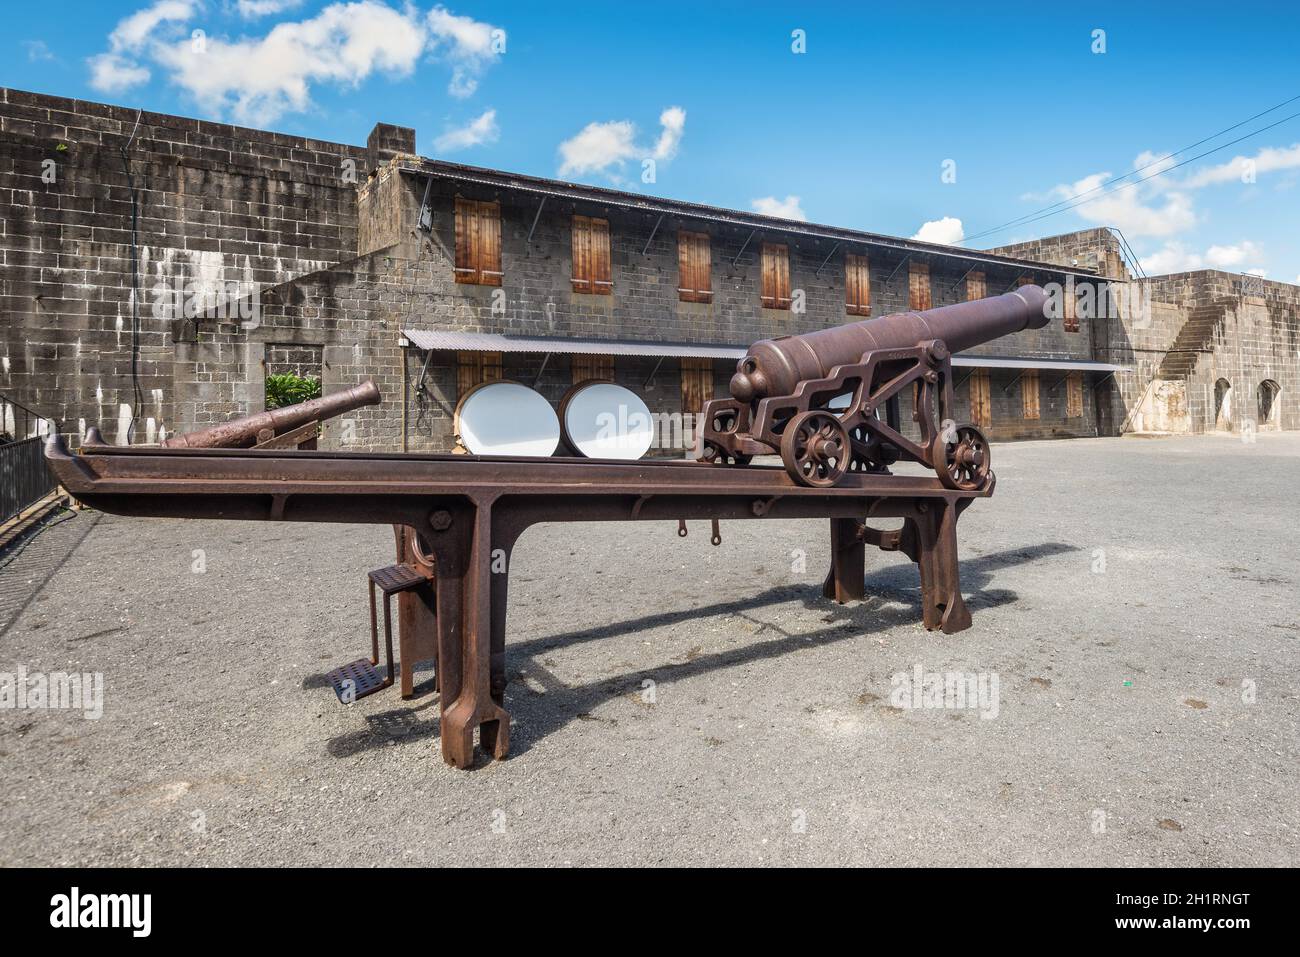 Port Louis, Mauritius - December 25, 2015: Old rusty cannon in the Fort Adelaide in Port Louis, Mauritius. The fortress dates back from the French col Stock Photo